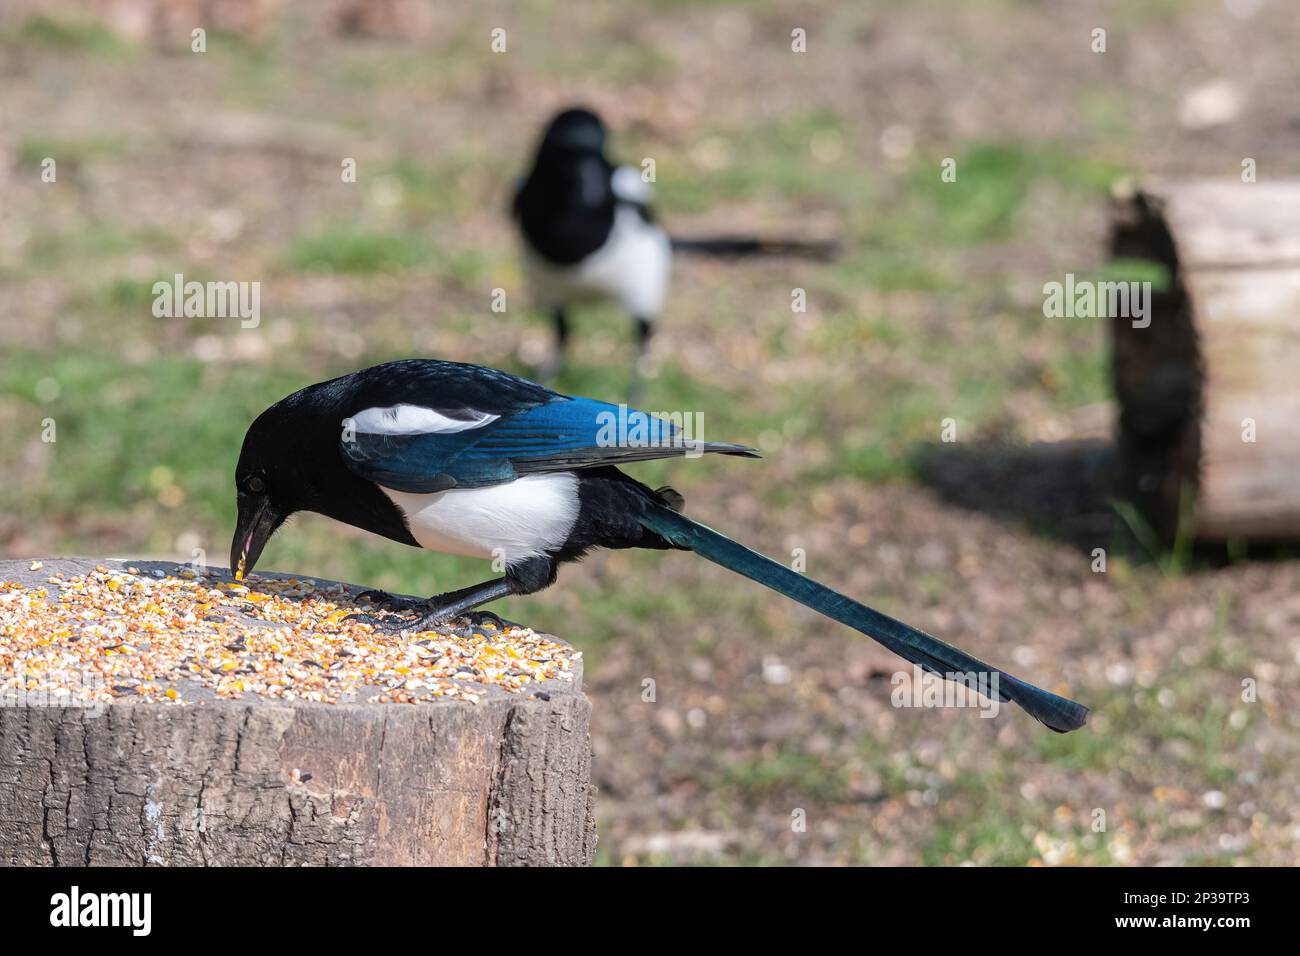 Magpie (Pica pica), black and white bird of the corvid family, UK. Two magpies, one feeding on bird seed Stock Photo